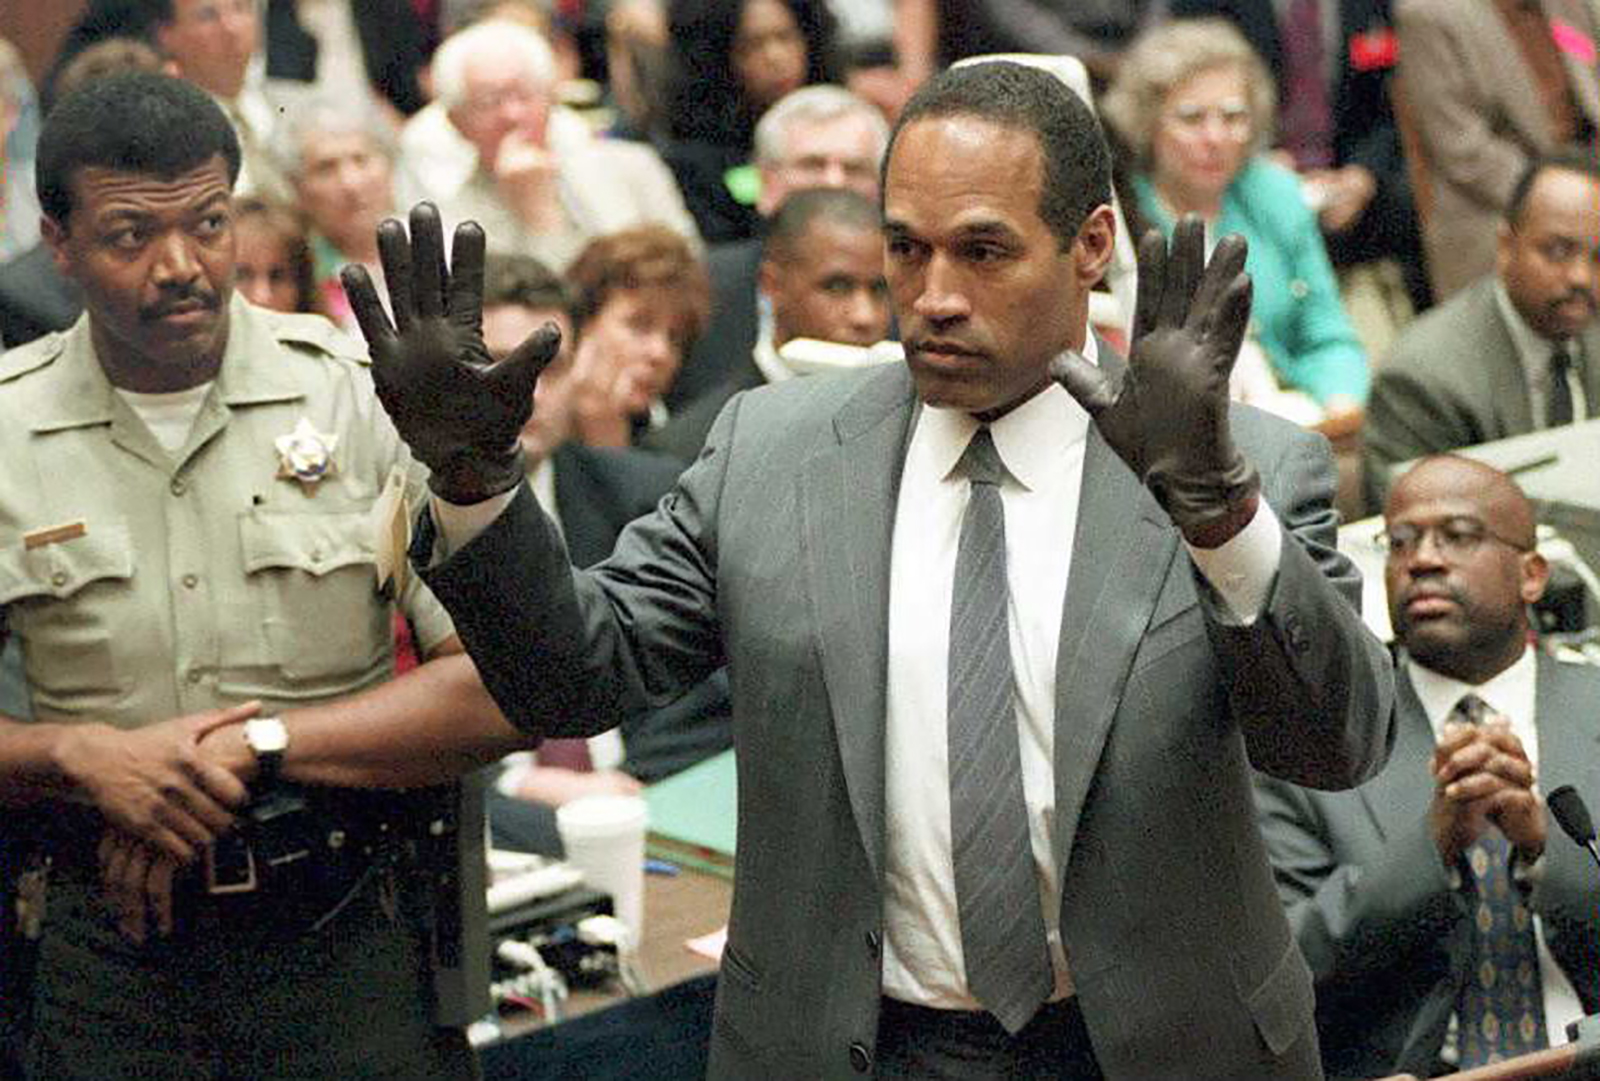 O.J. Simpson shows the jury a new pair of Aris extra-large gloves during his double murder trial in Los Angeles in 1995.